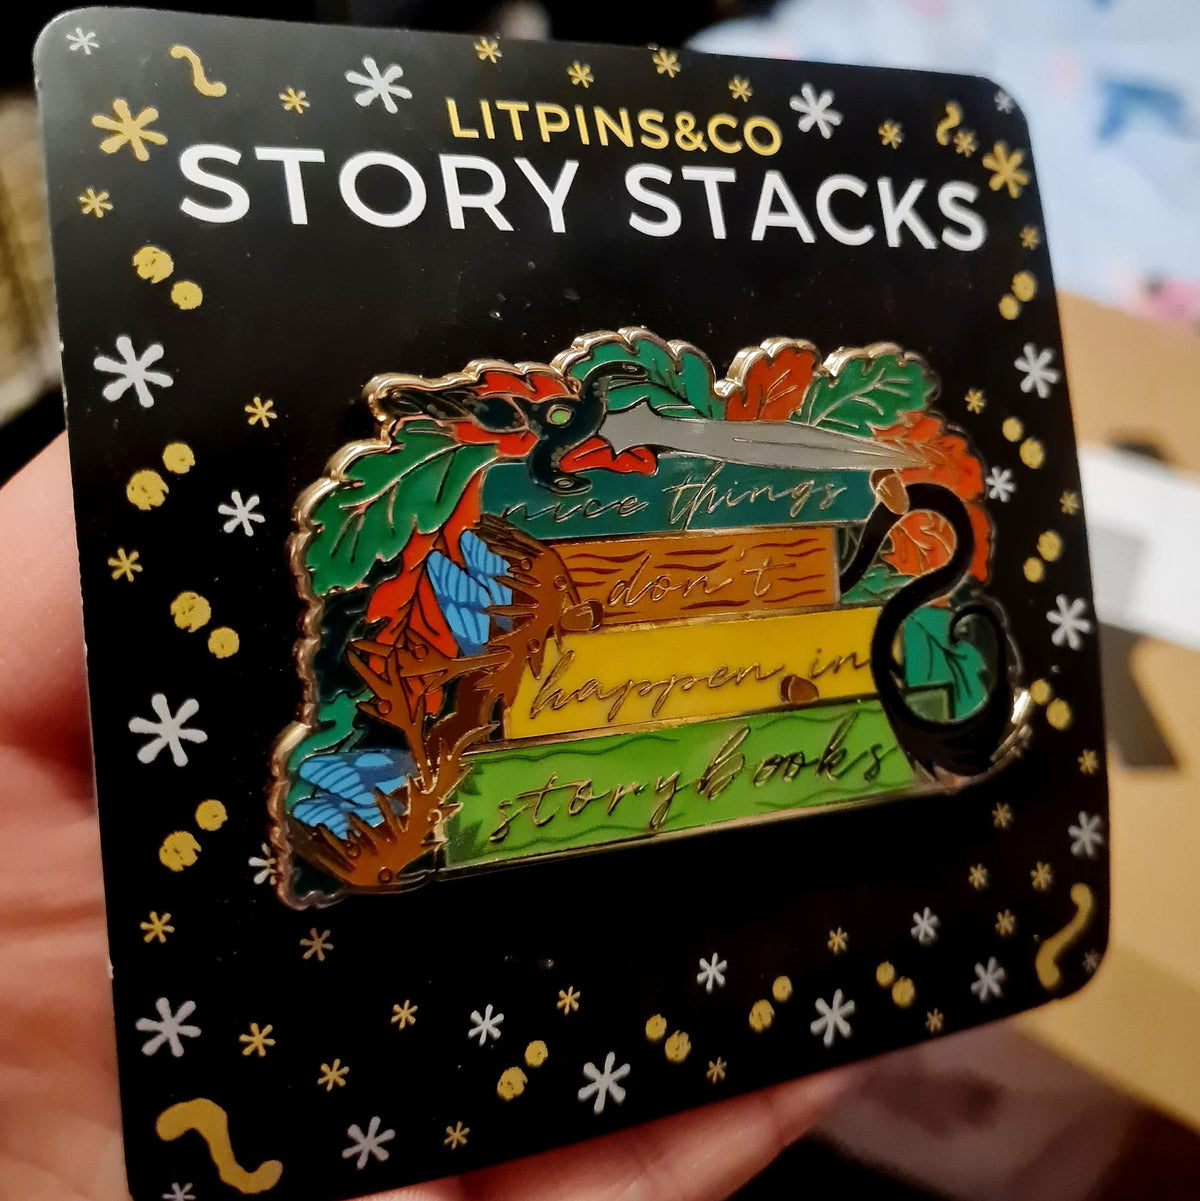 The Cruel Prince by Holly Black Story Stack Enamel Pin against the LitPins&amp;Co backing card.